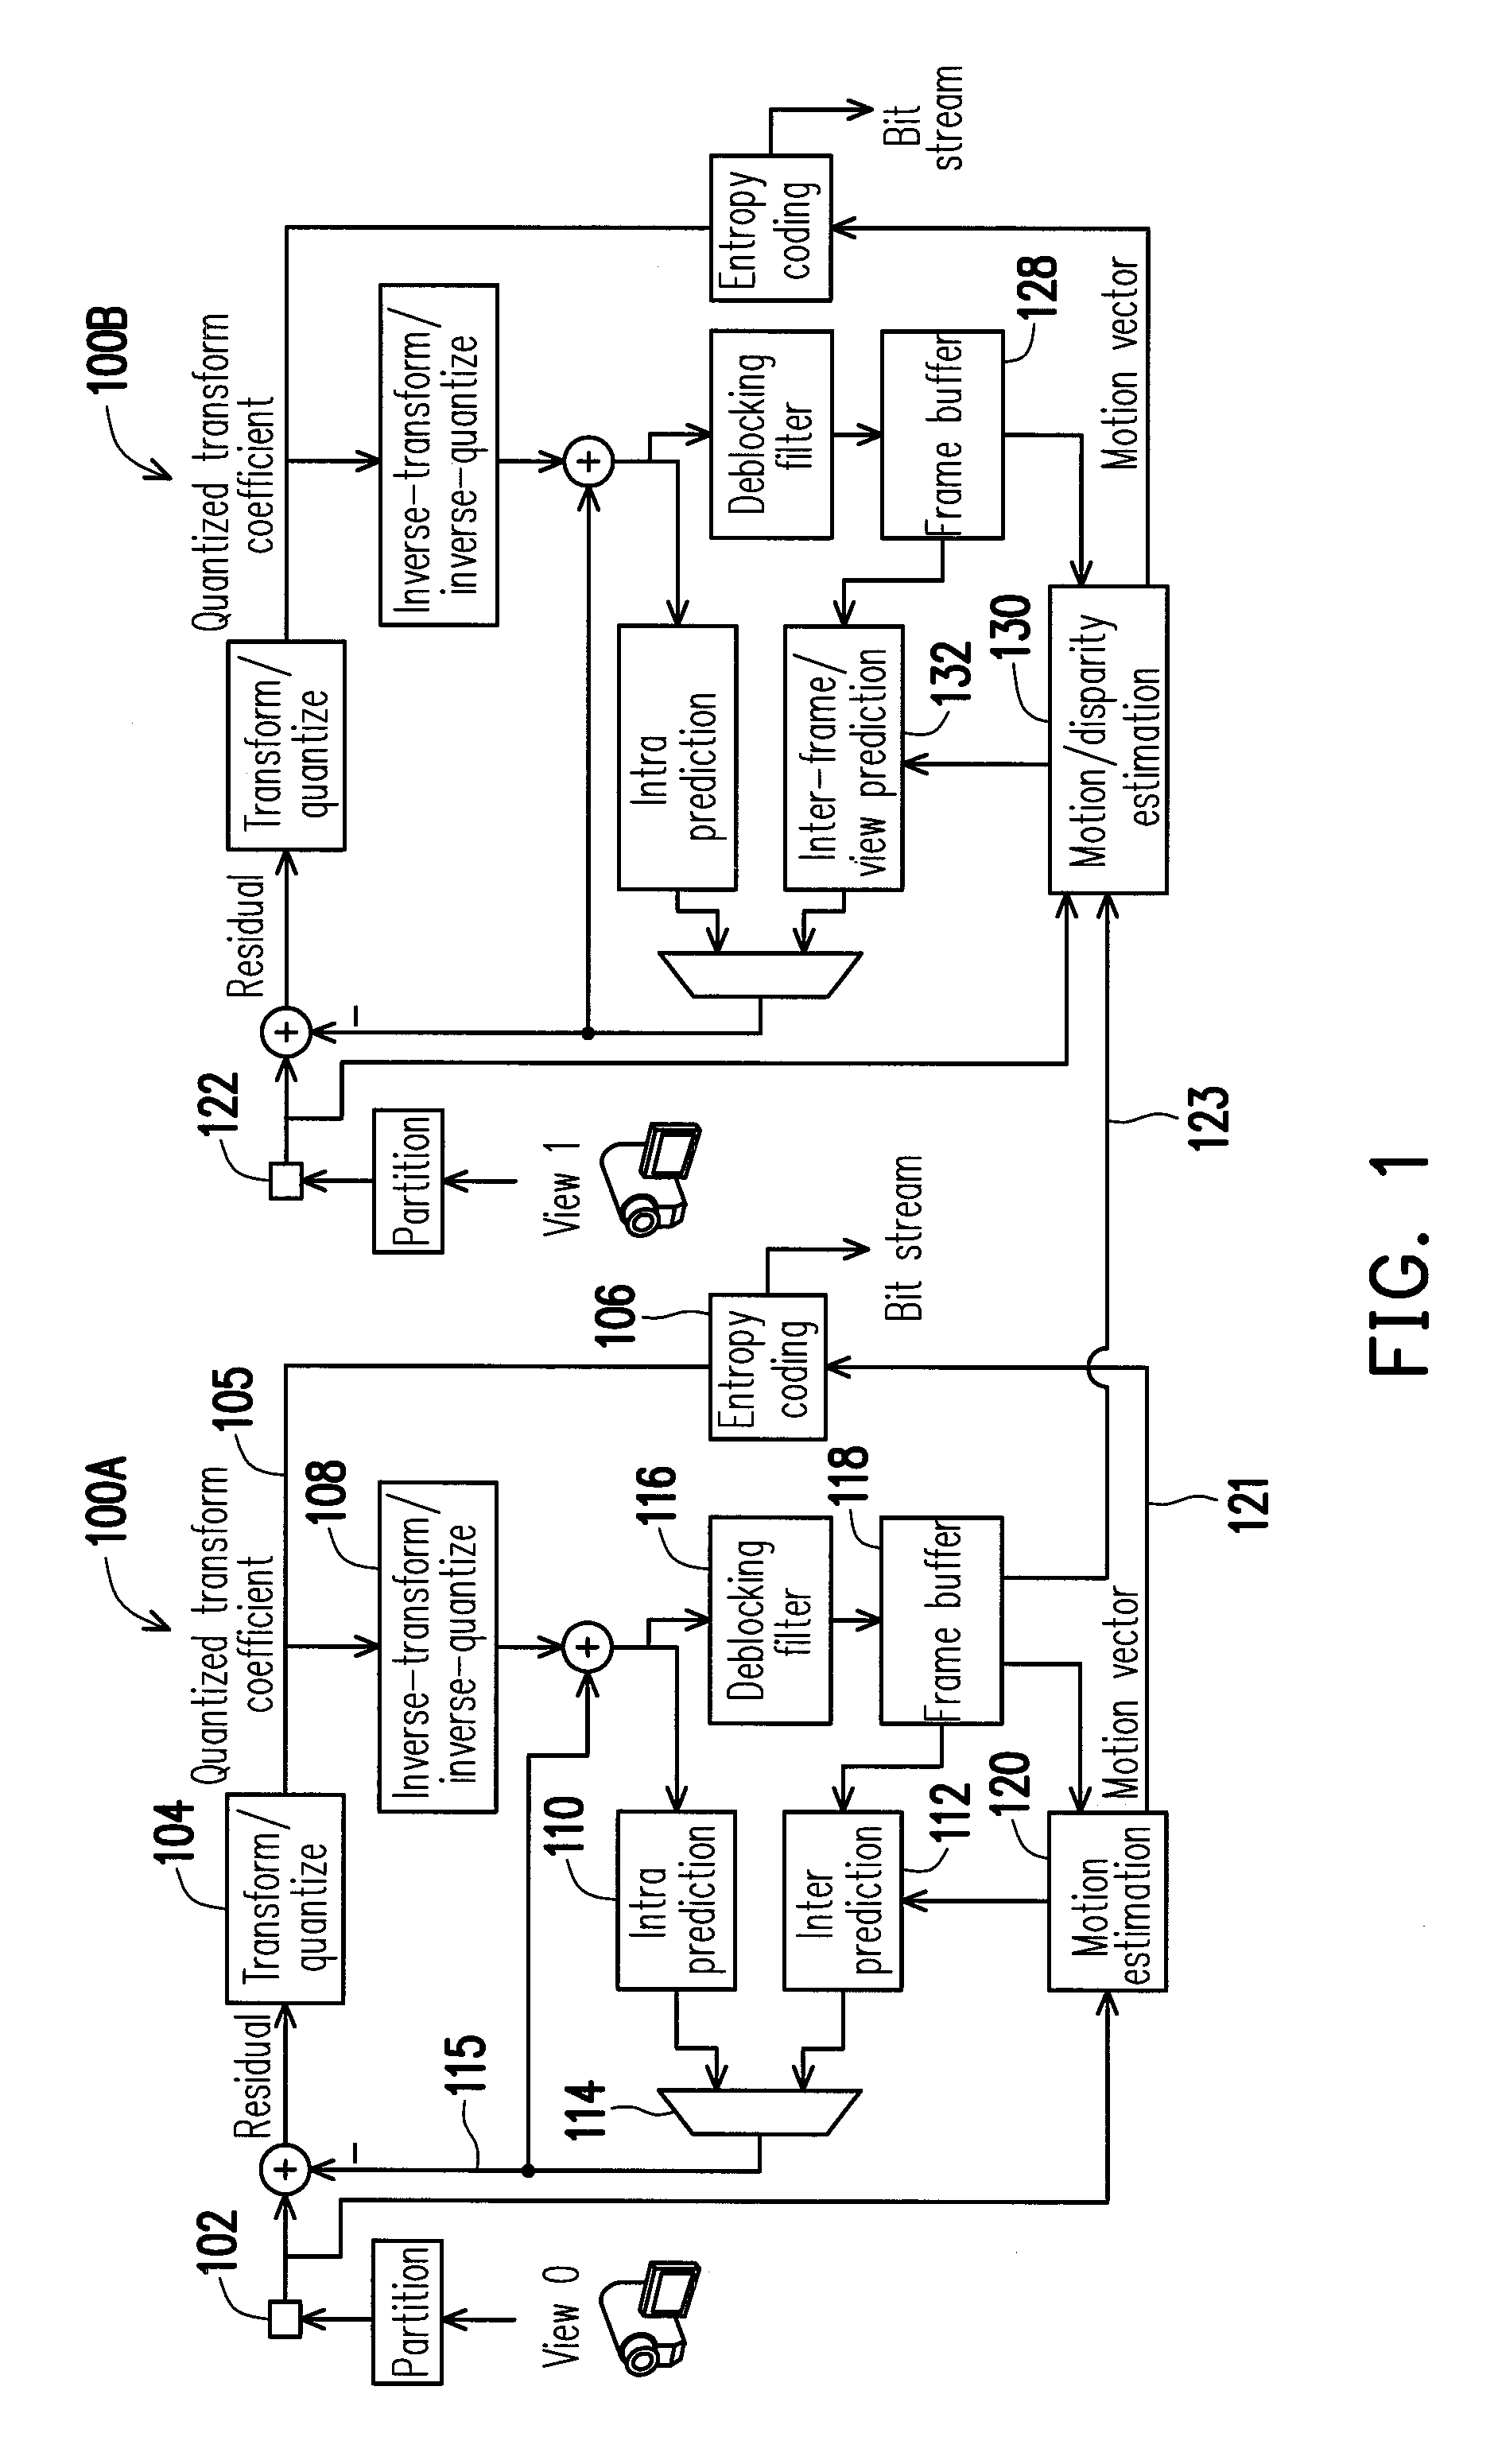 Adaptive search range method for motion estimation and disparity estimation